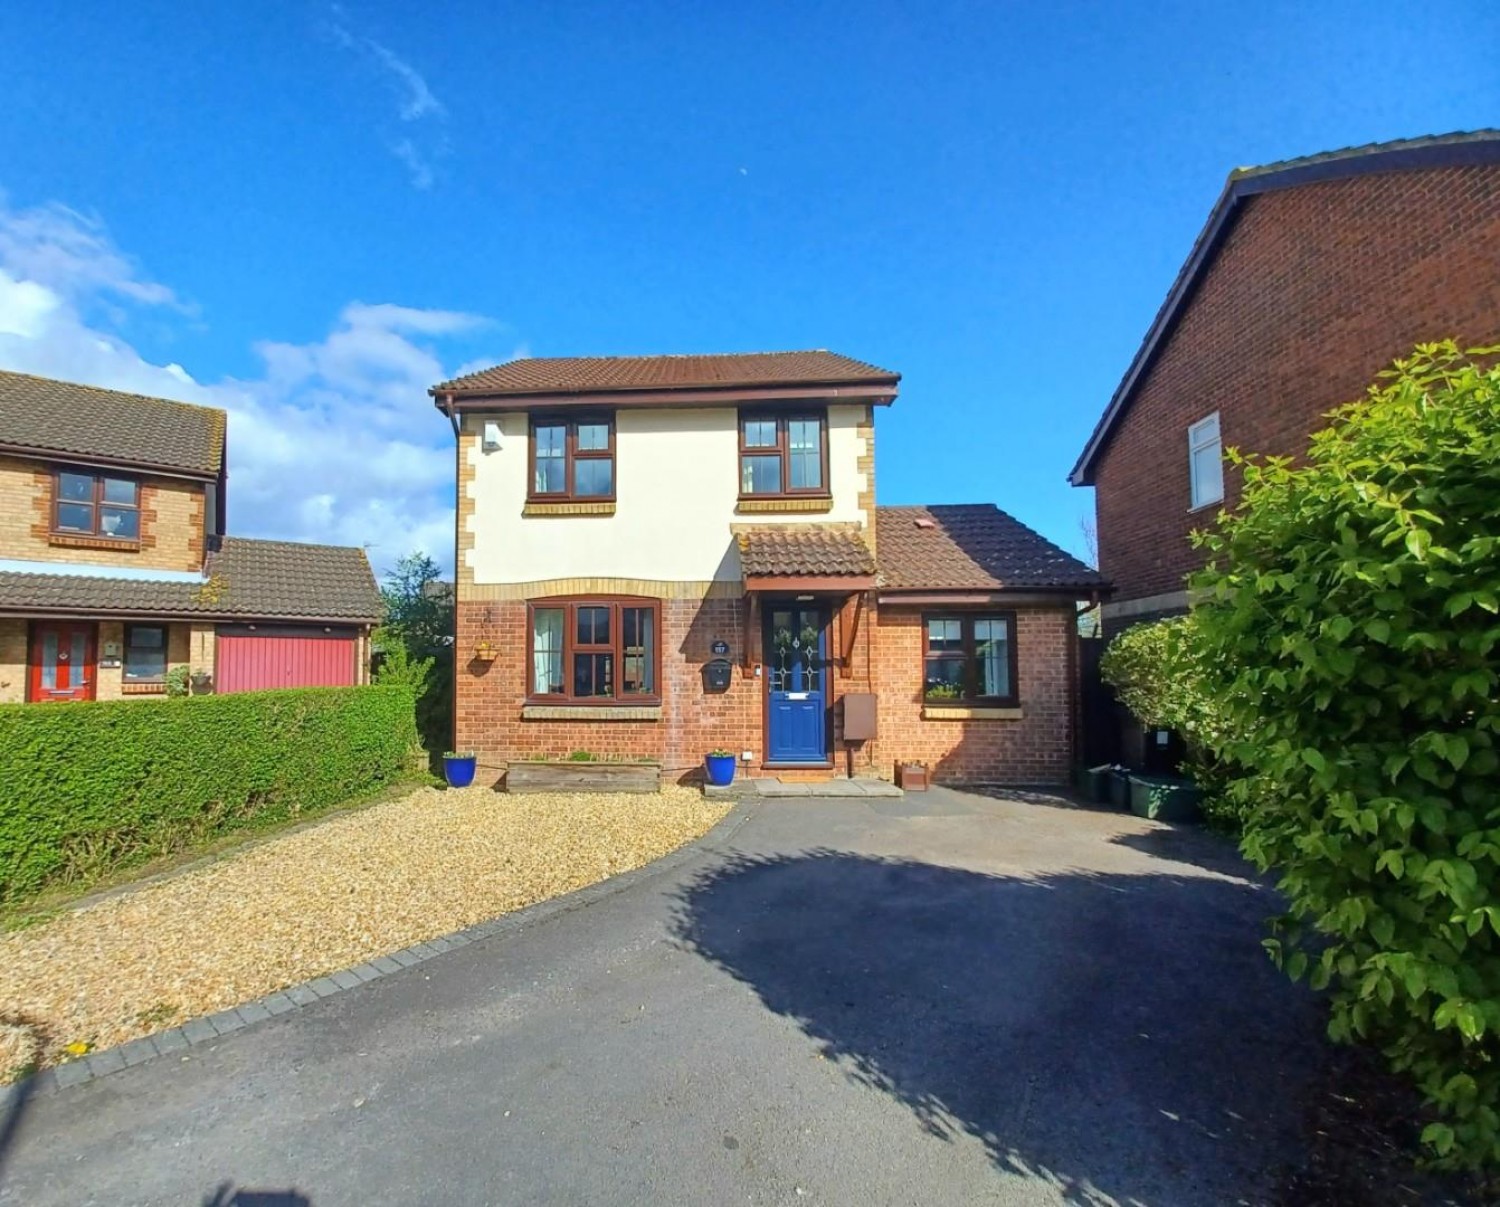 Woodlands Road, Charfield, South Gloucestershire